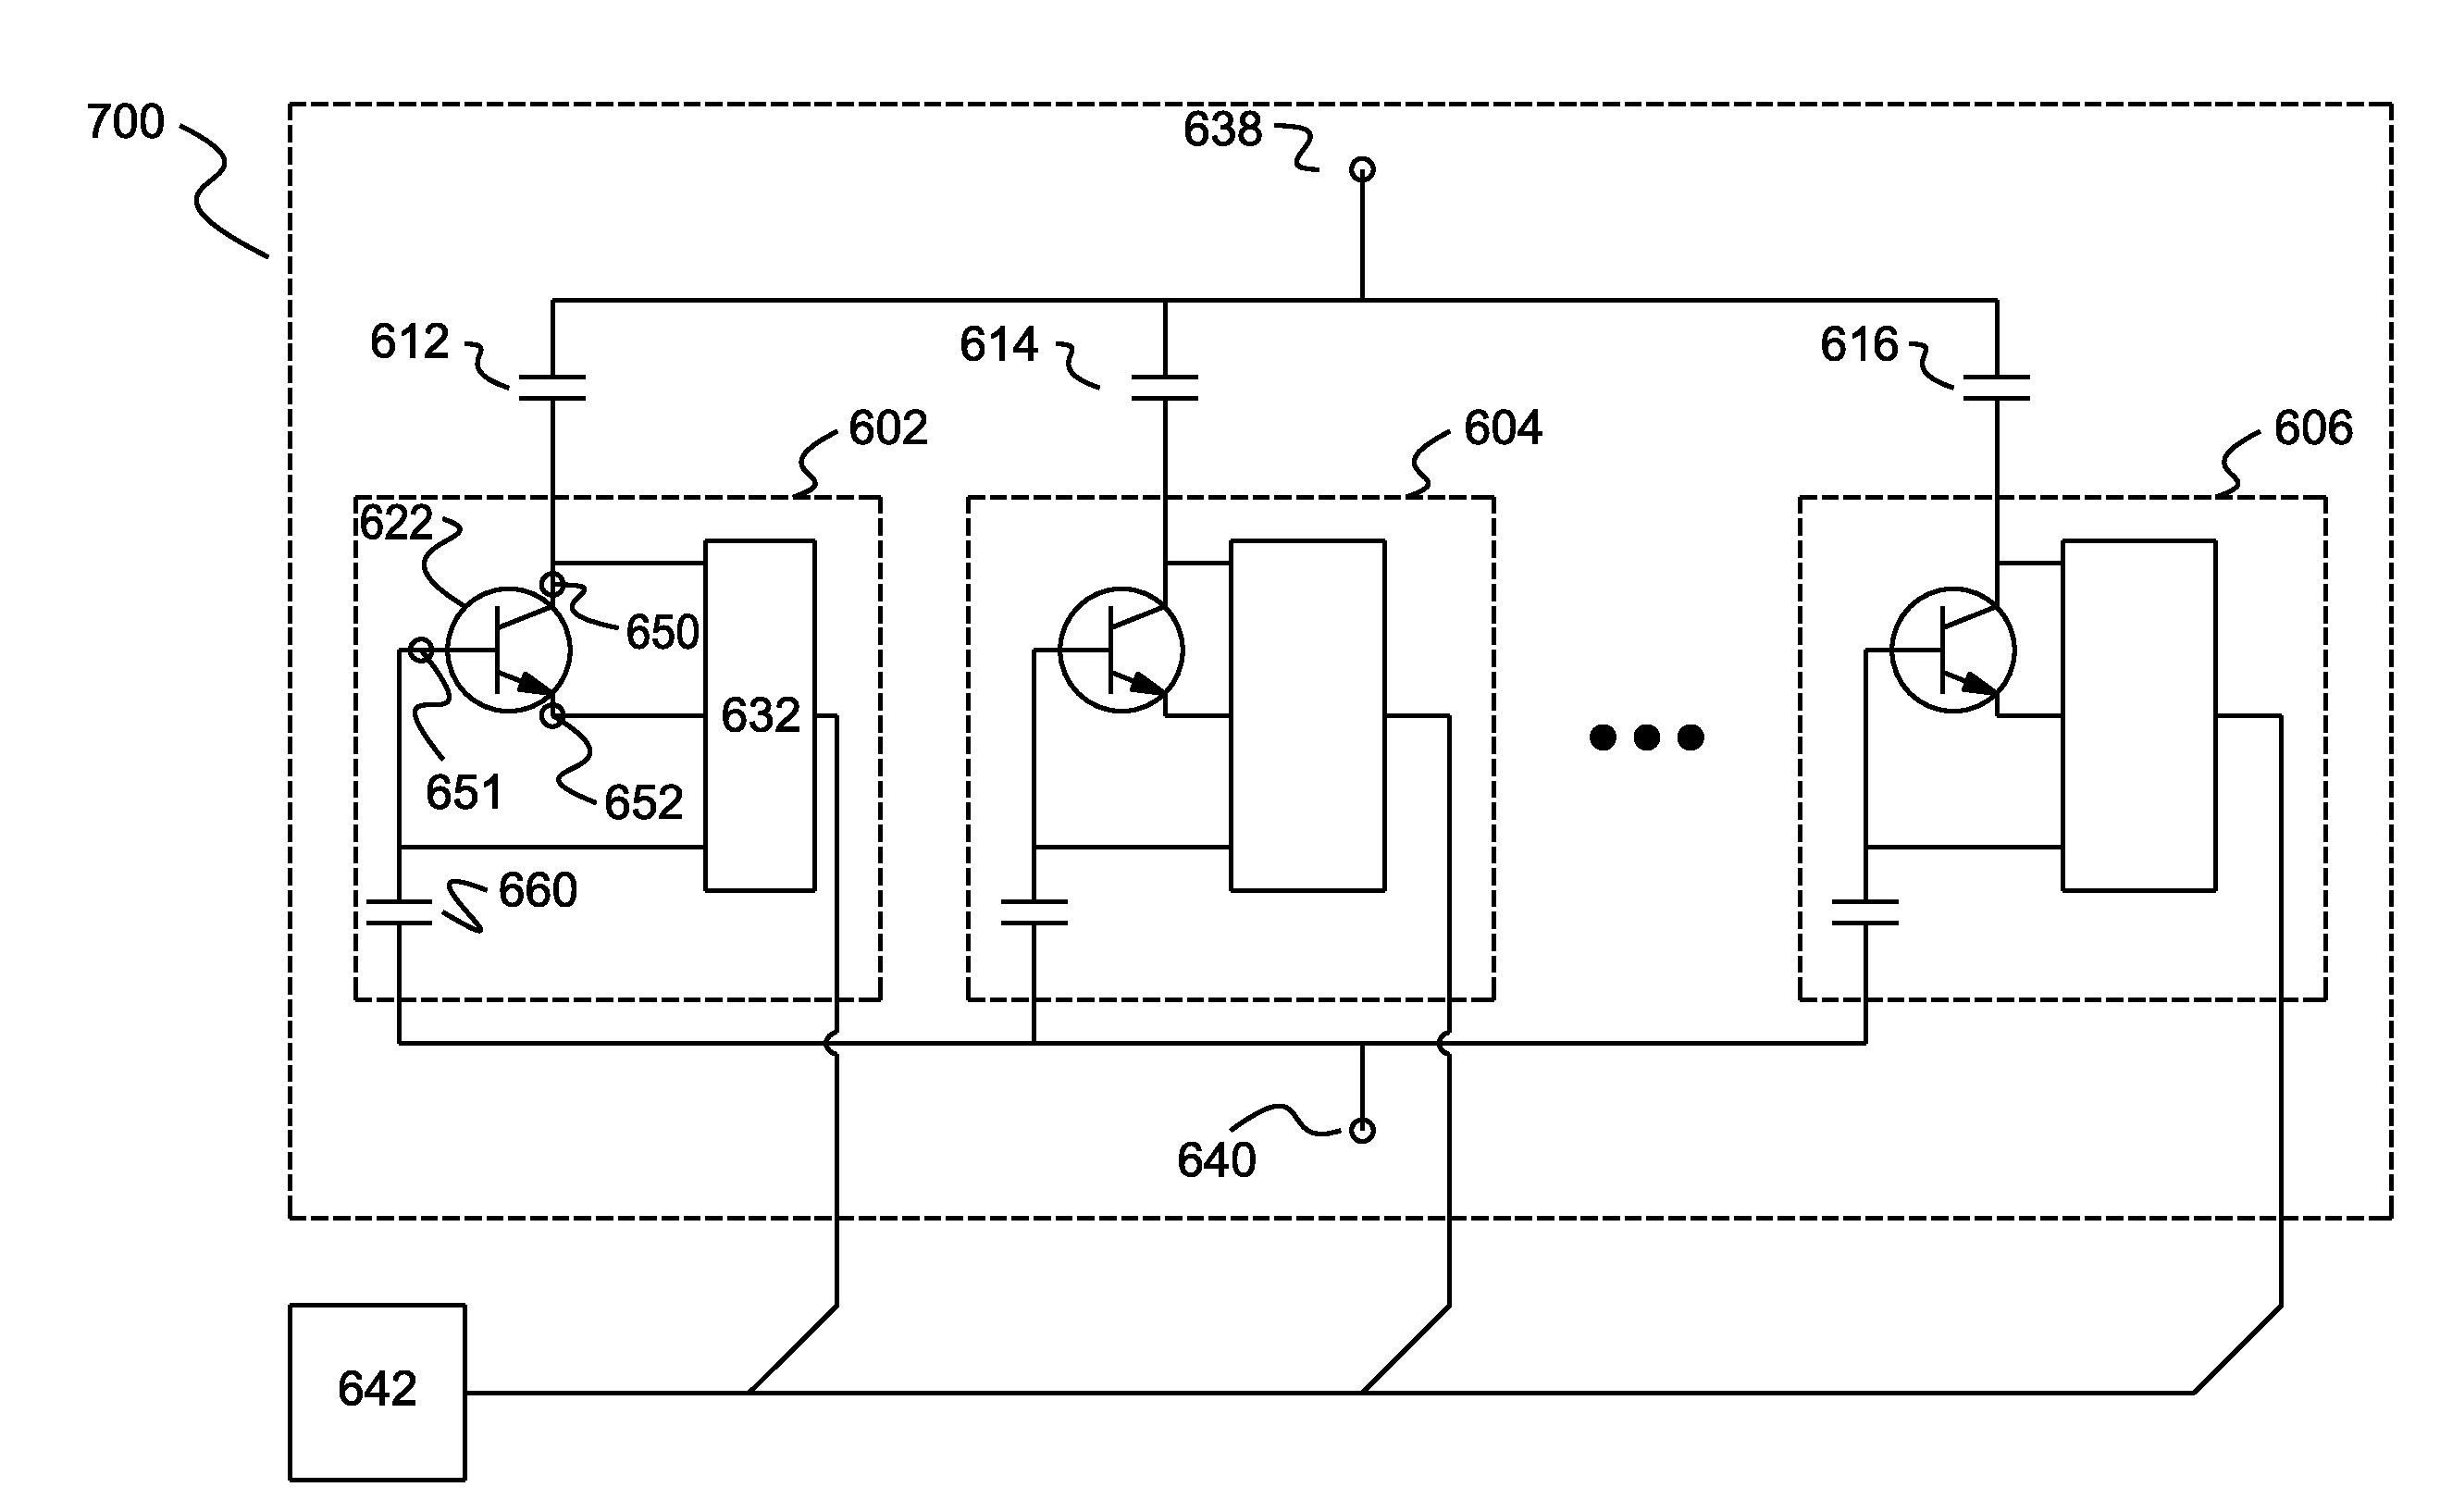 Impedance-Matching Network Using BJT Switches in Variable-Reactance Circuits